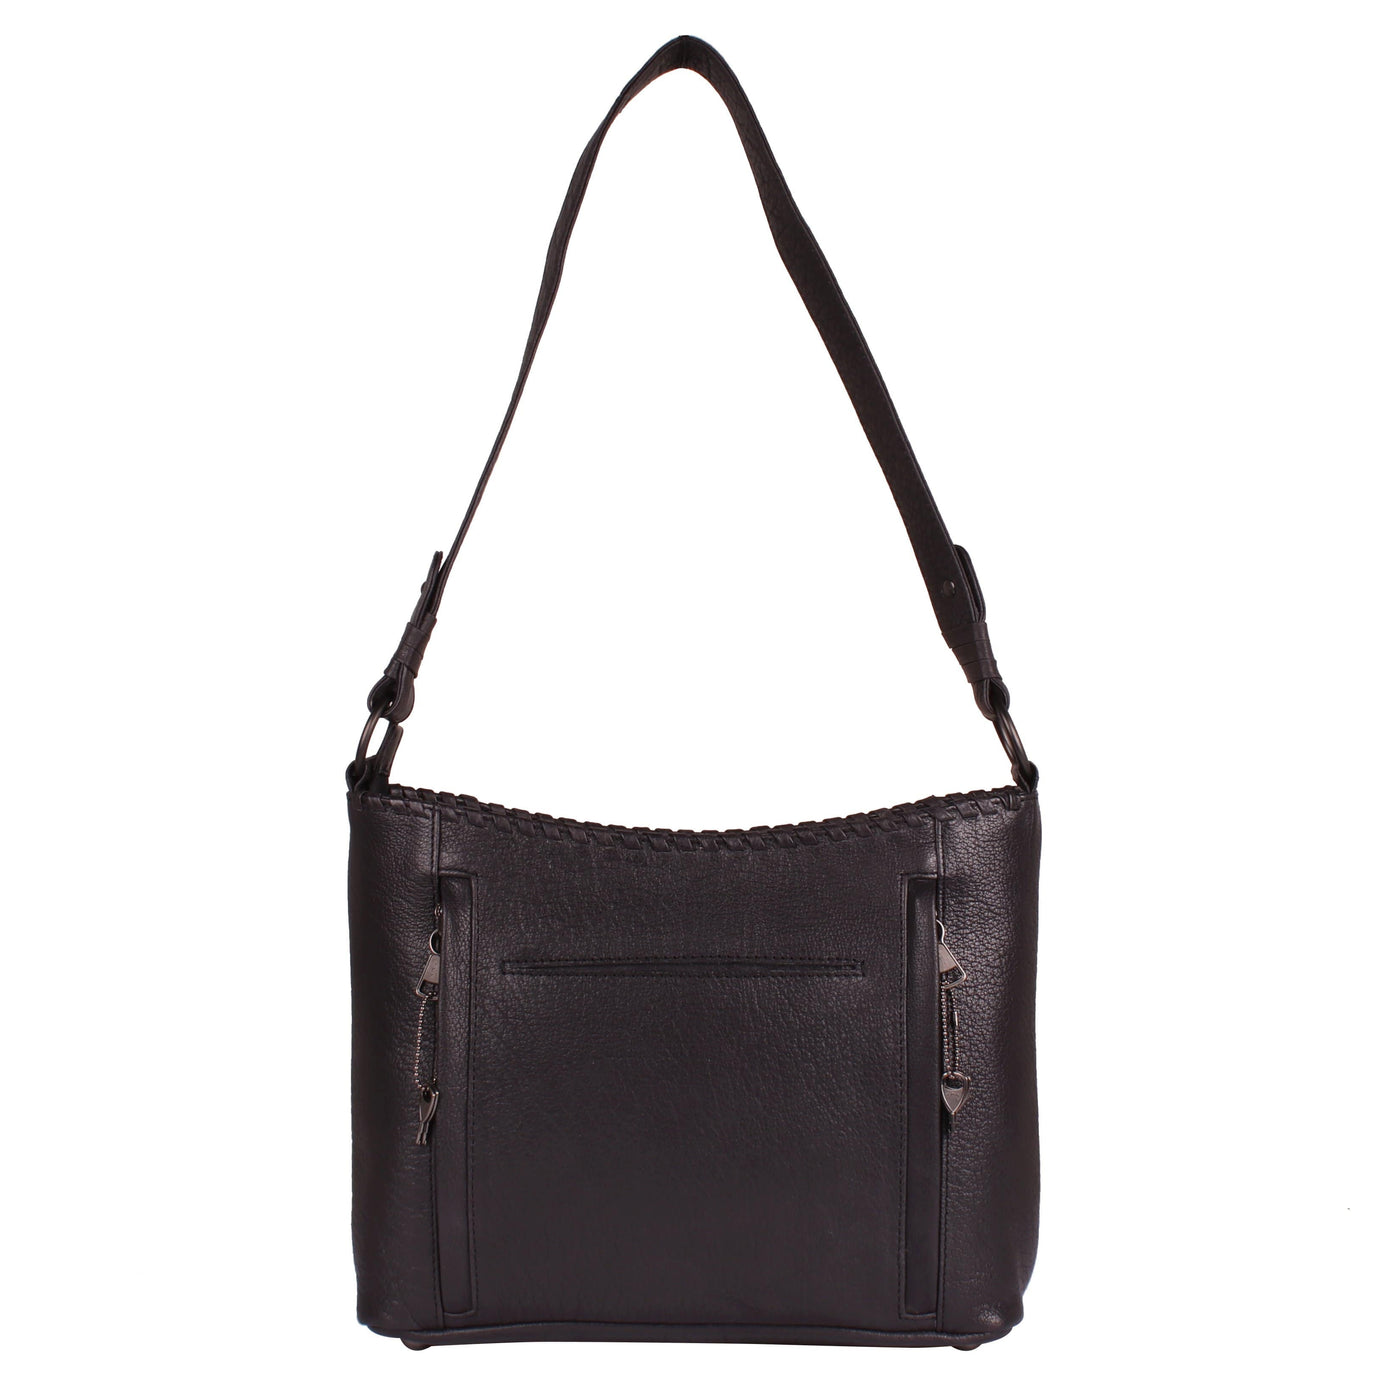 Lady Conceal Concealed Carry Purse Concealed Carry Juliana Leather Hobo by Lady Conceal Black